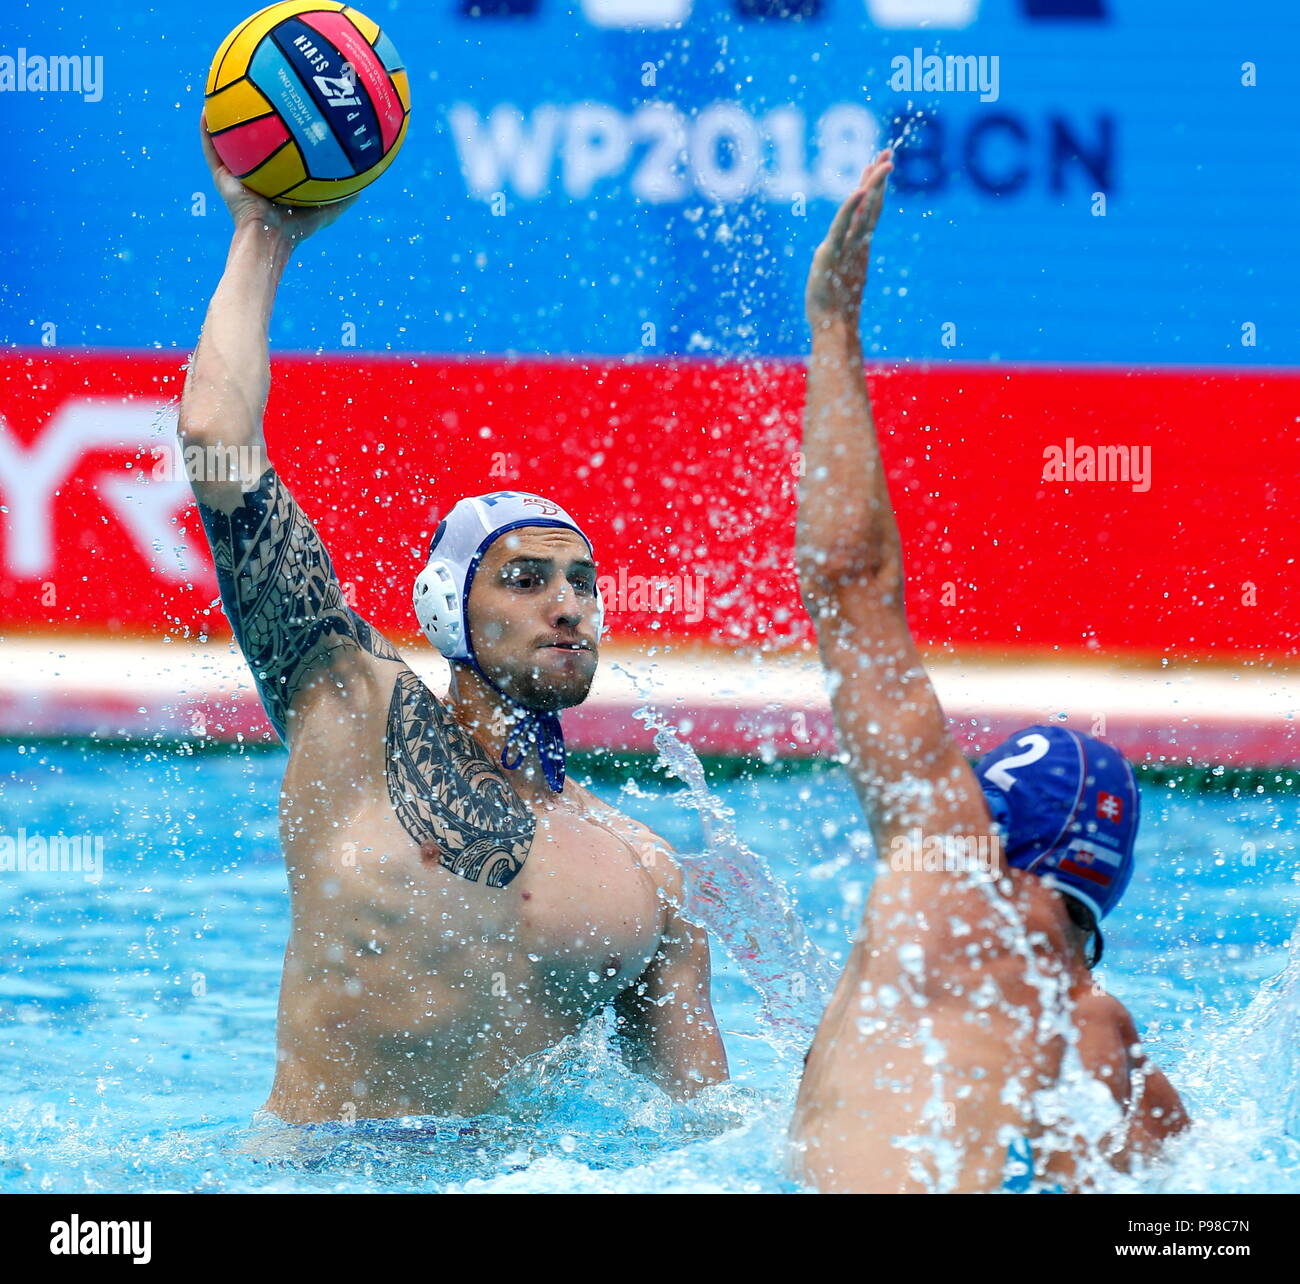 Barcelona, Spain. 16th July, 2018. Barcelona, Spain. 16th July 2018. Stepan  Adryukov in action during game between Russia against Slovakia LEN European  Water Polo Championships, Barcelona 16.07.2018 Credit: Joma/Alamy Live News  Credit: